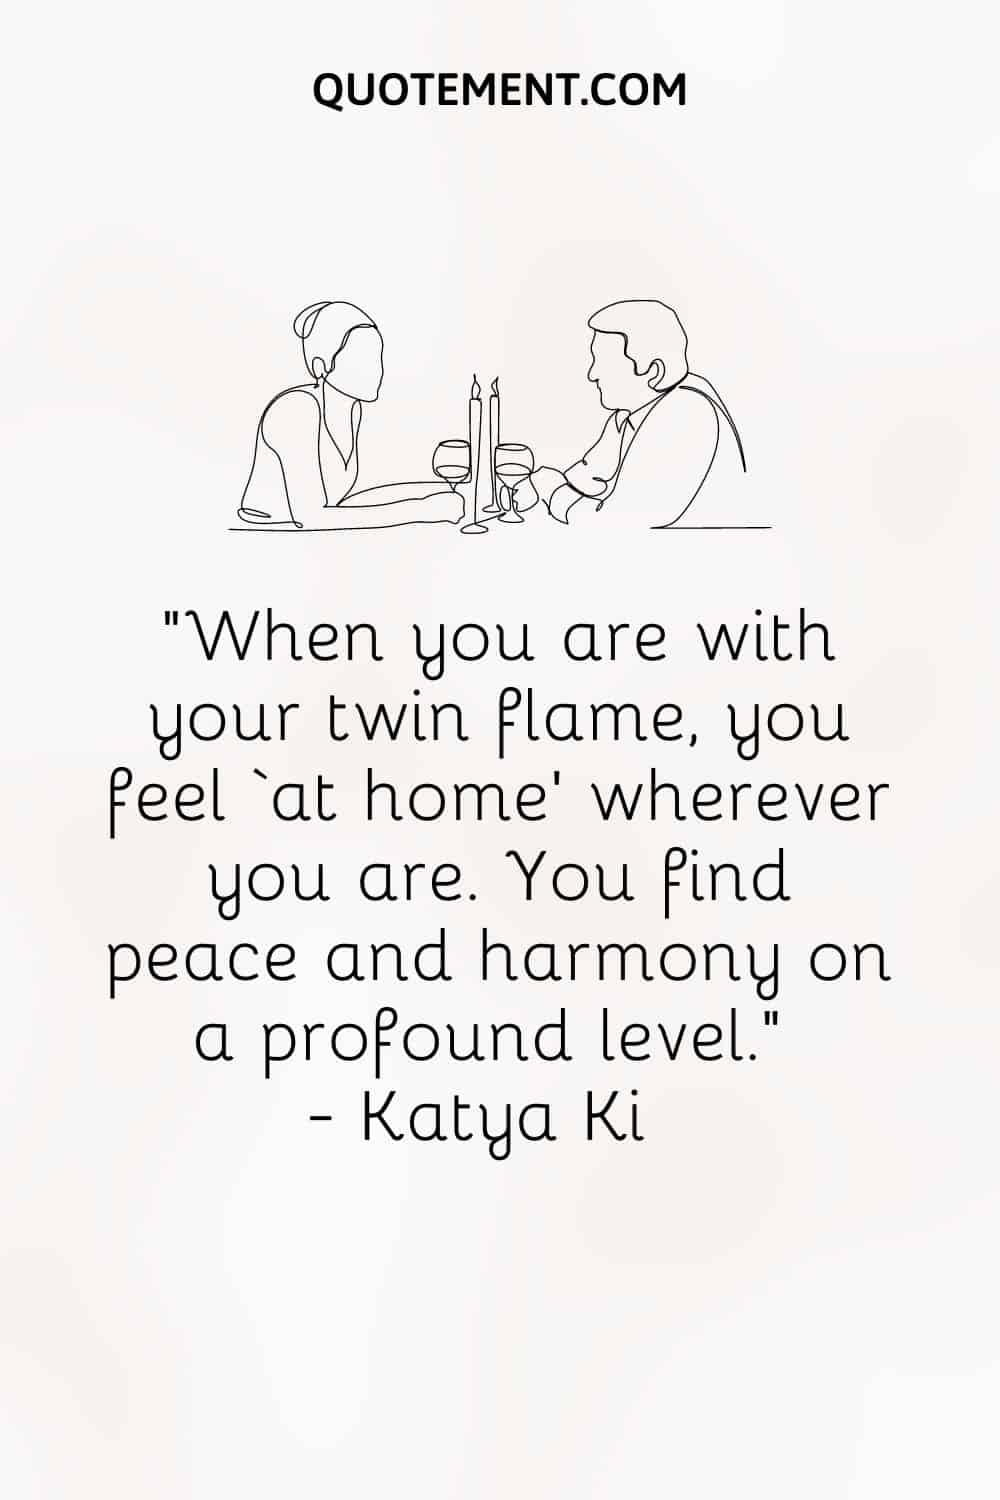 When you are with your twin flame, you feel ‘at home’ wherever you are. You find peace and harmony on a profound level